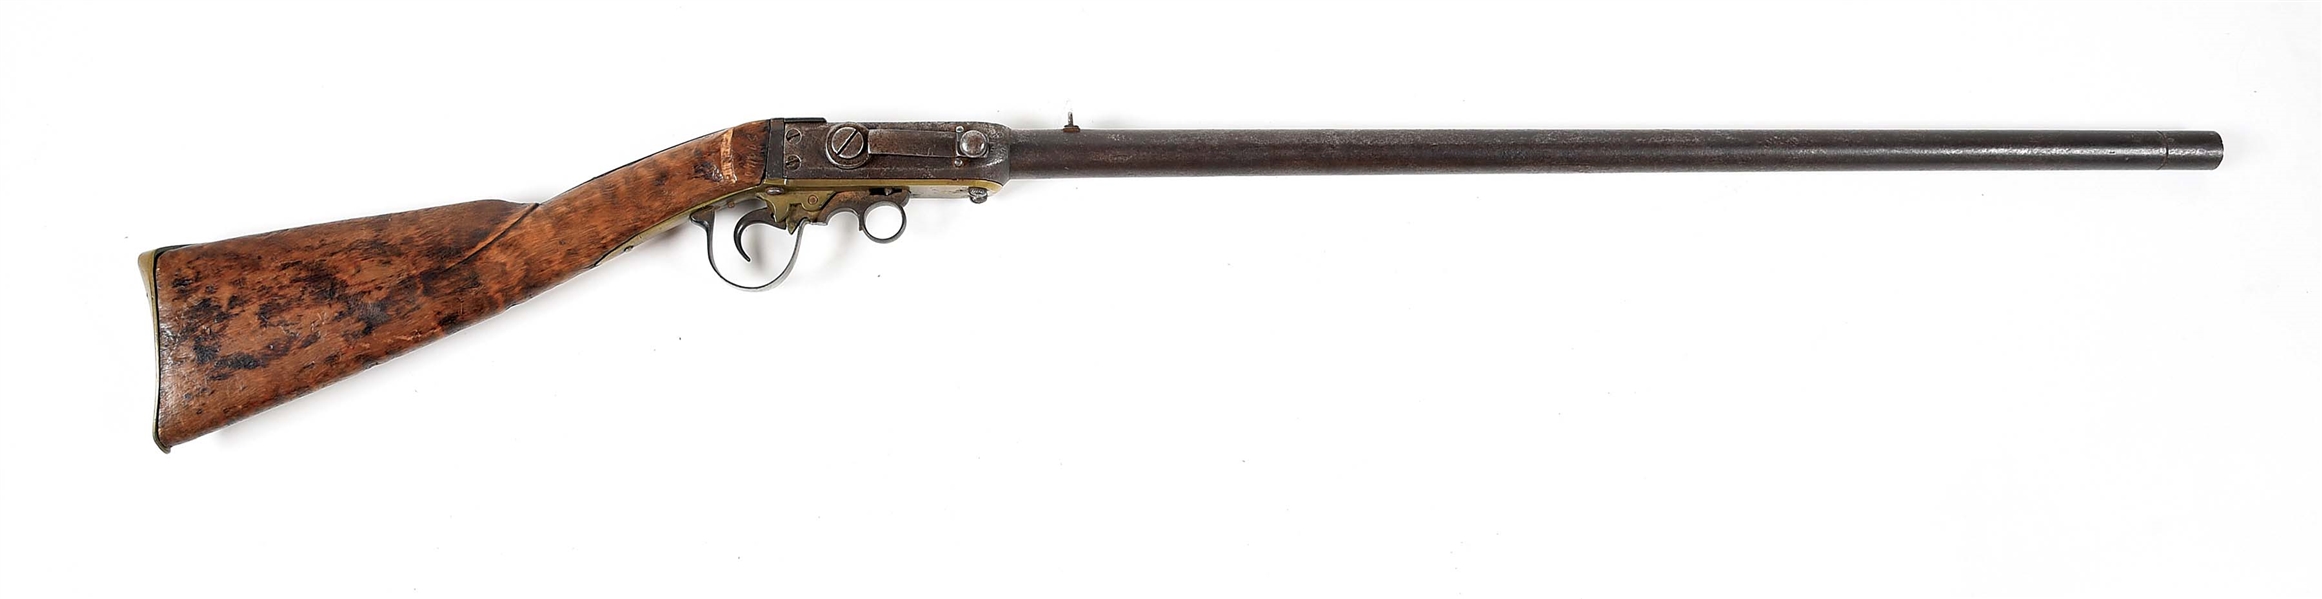 (A) NORWEGIAN BREECH LOADING CARBINE IN THE KAMMERLADER STYLE BY DRAMMEN.